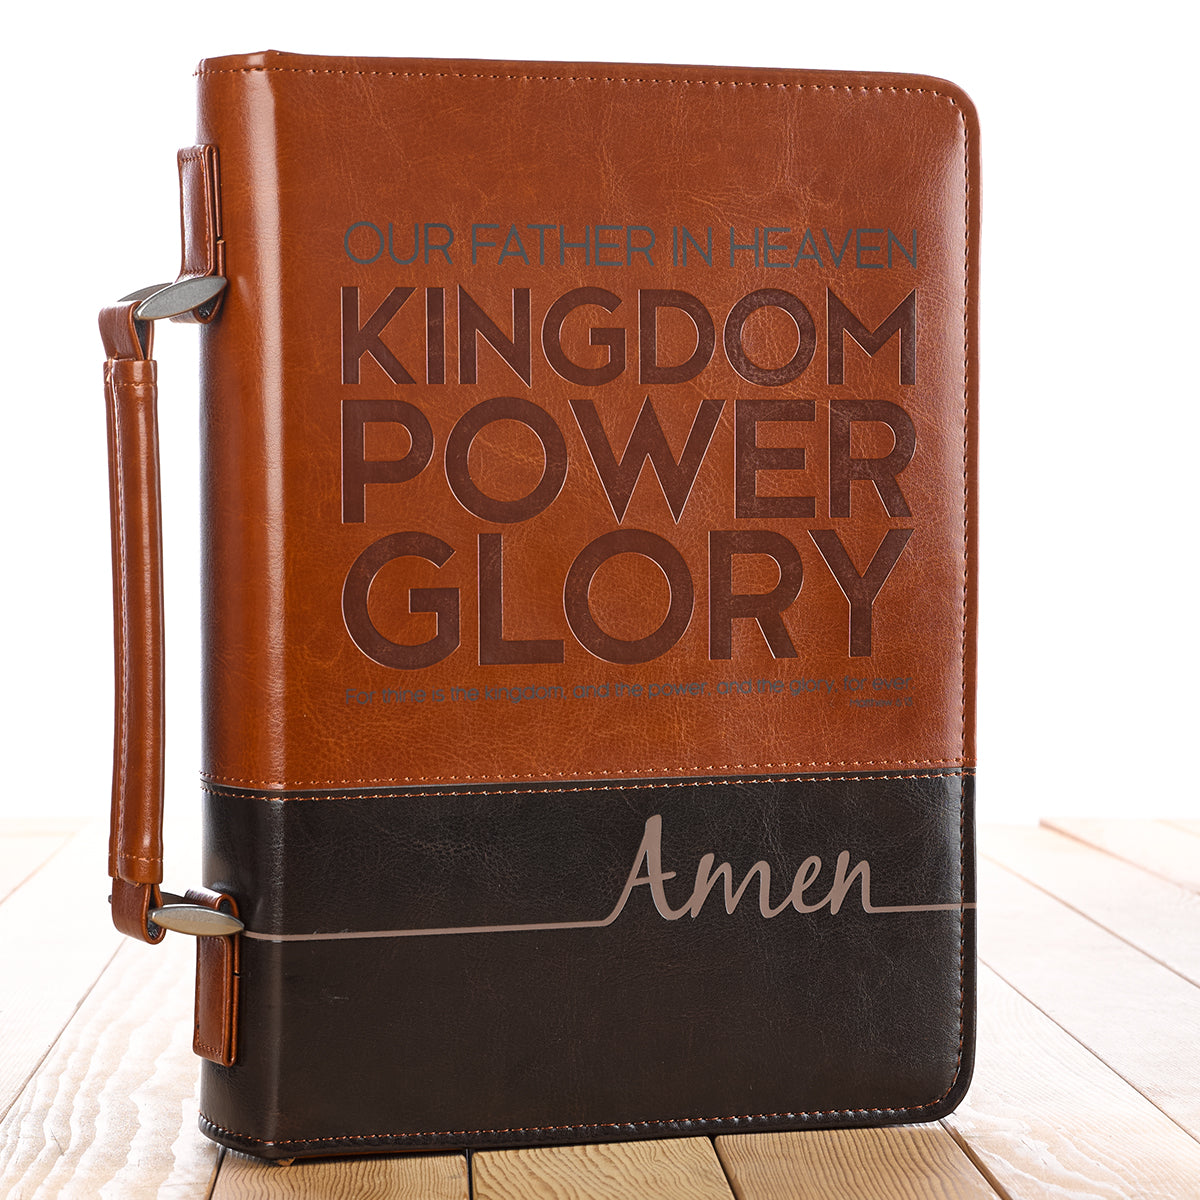 Image of Bible Cover Large Brown - The Lord's Prayer - Imitation Leather other